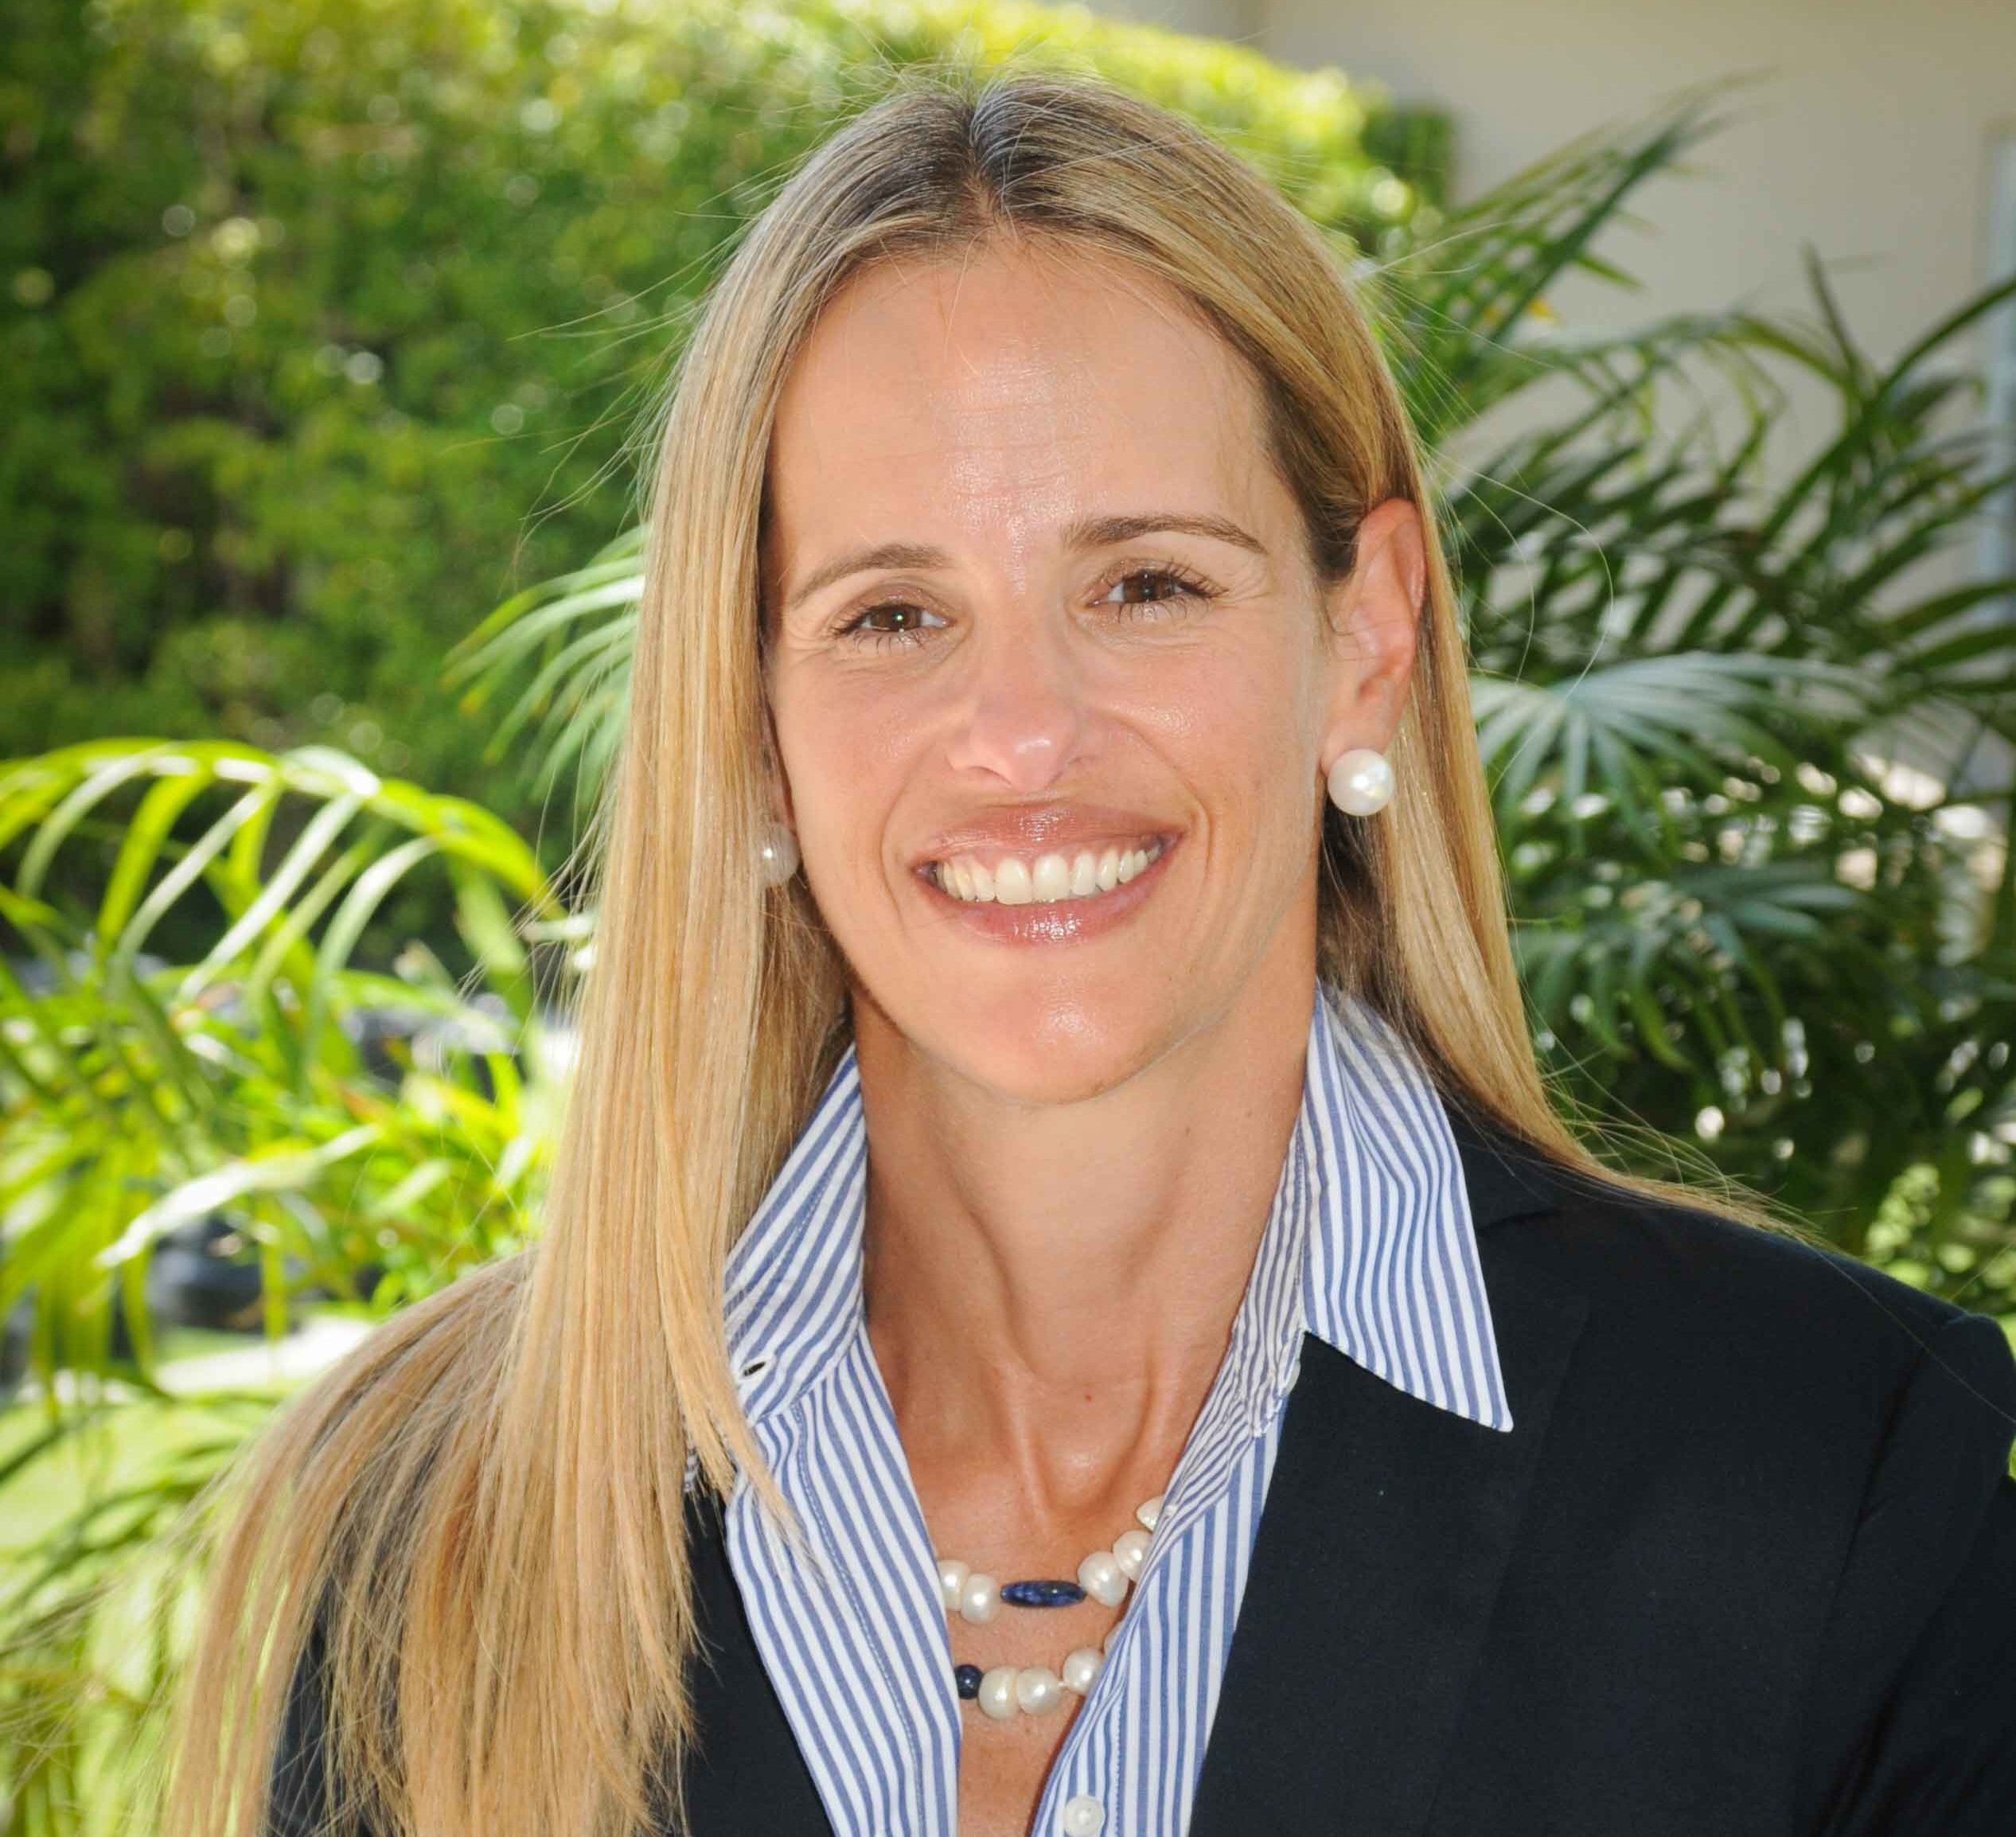 A picture of Jennifer Roig, head of The Roig Academy